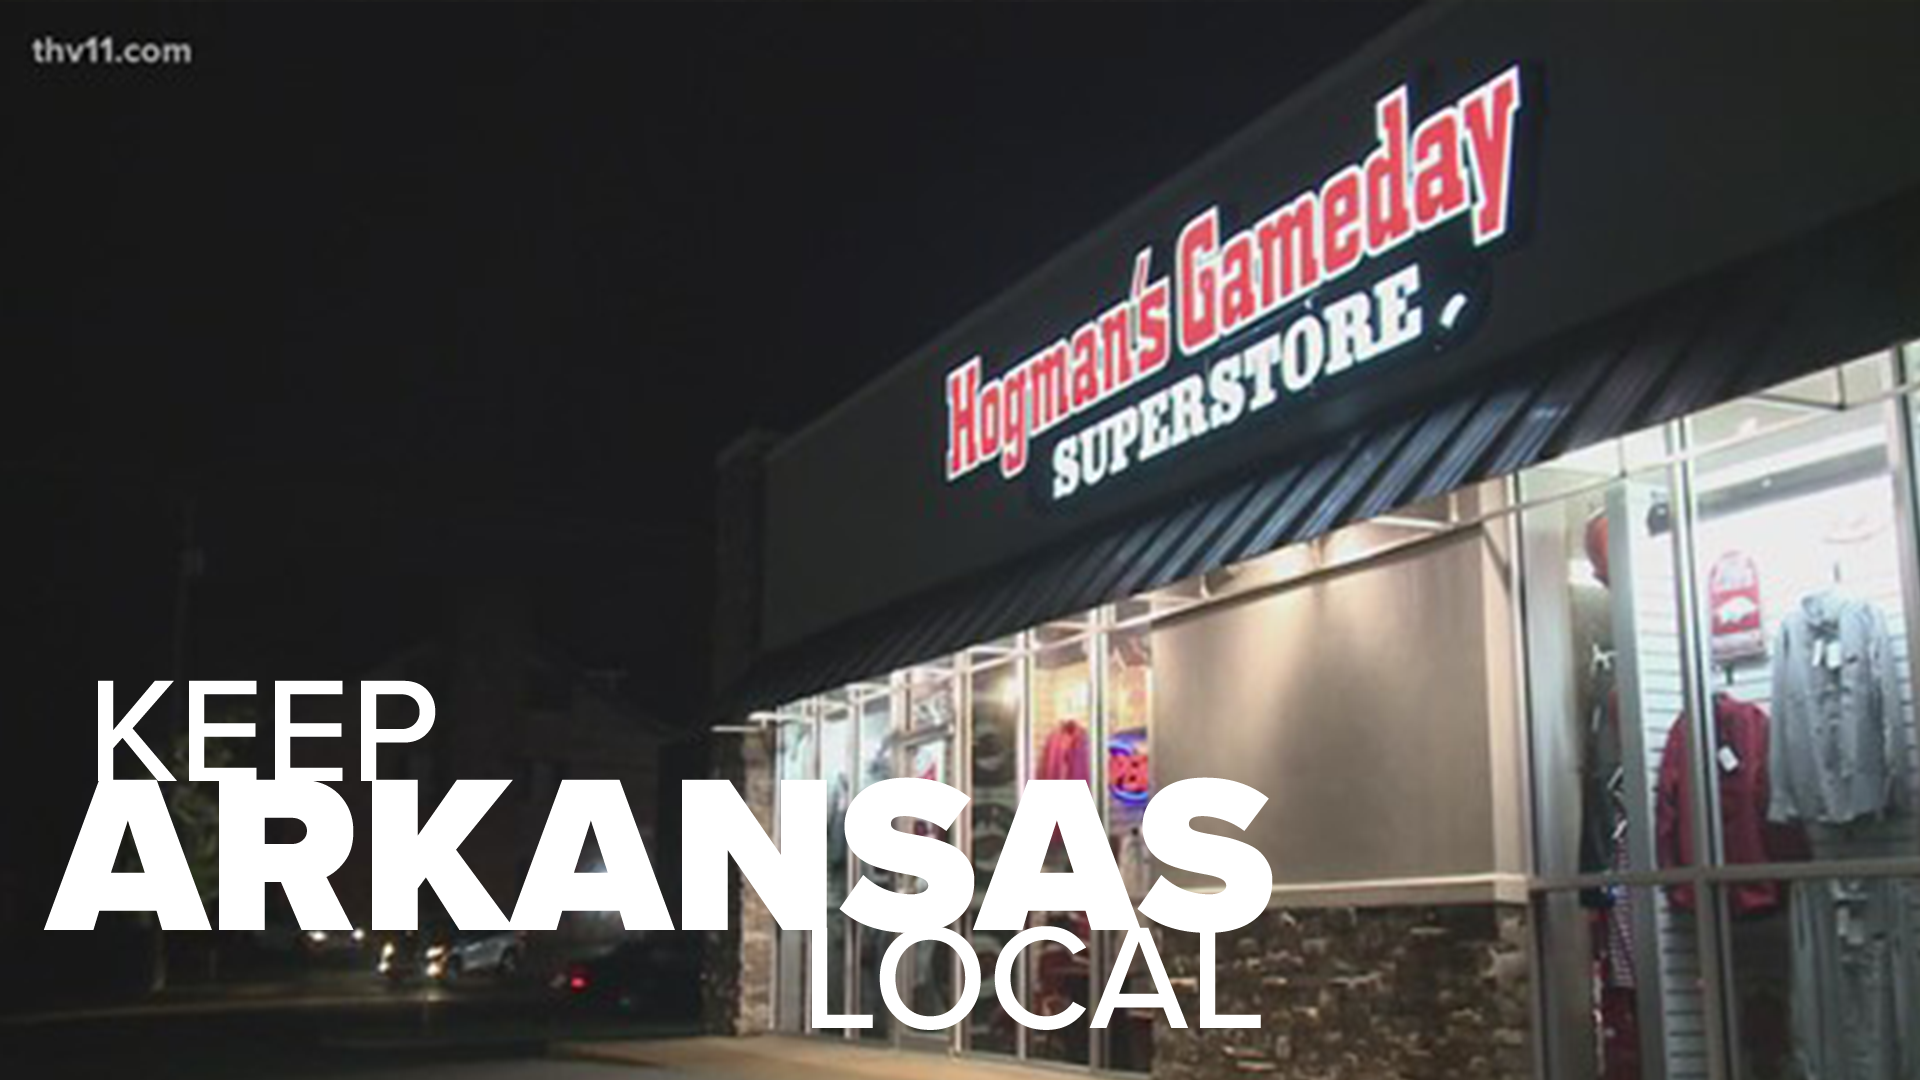 We're helping keep Arkansas local, by shining a spotlight on a few of them. Today, you'll go hog wild for this souvenir shop.